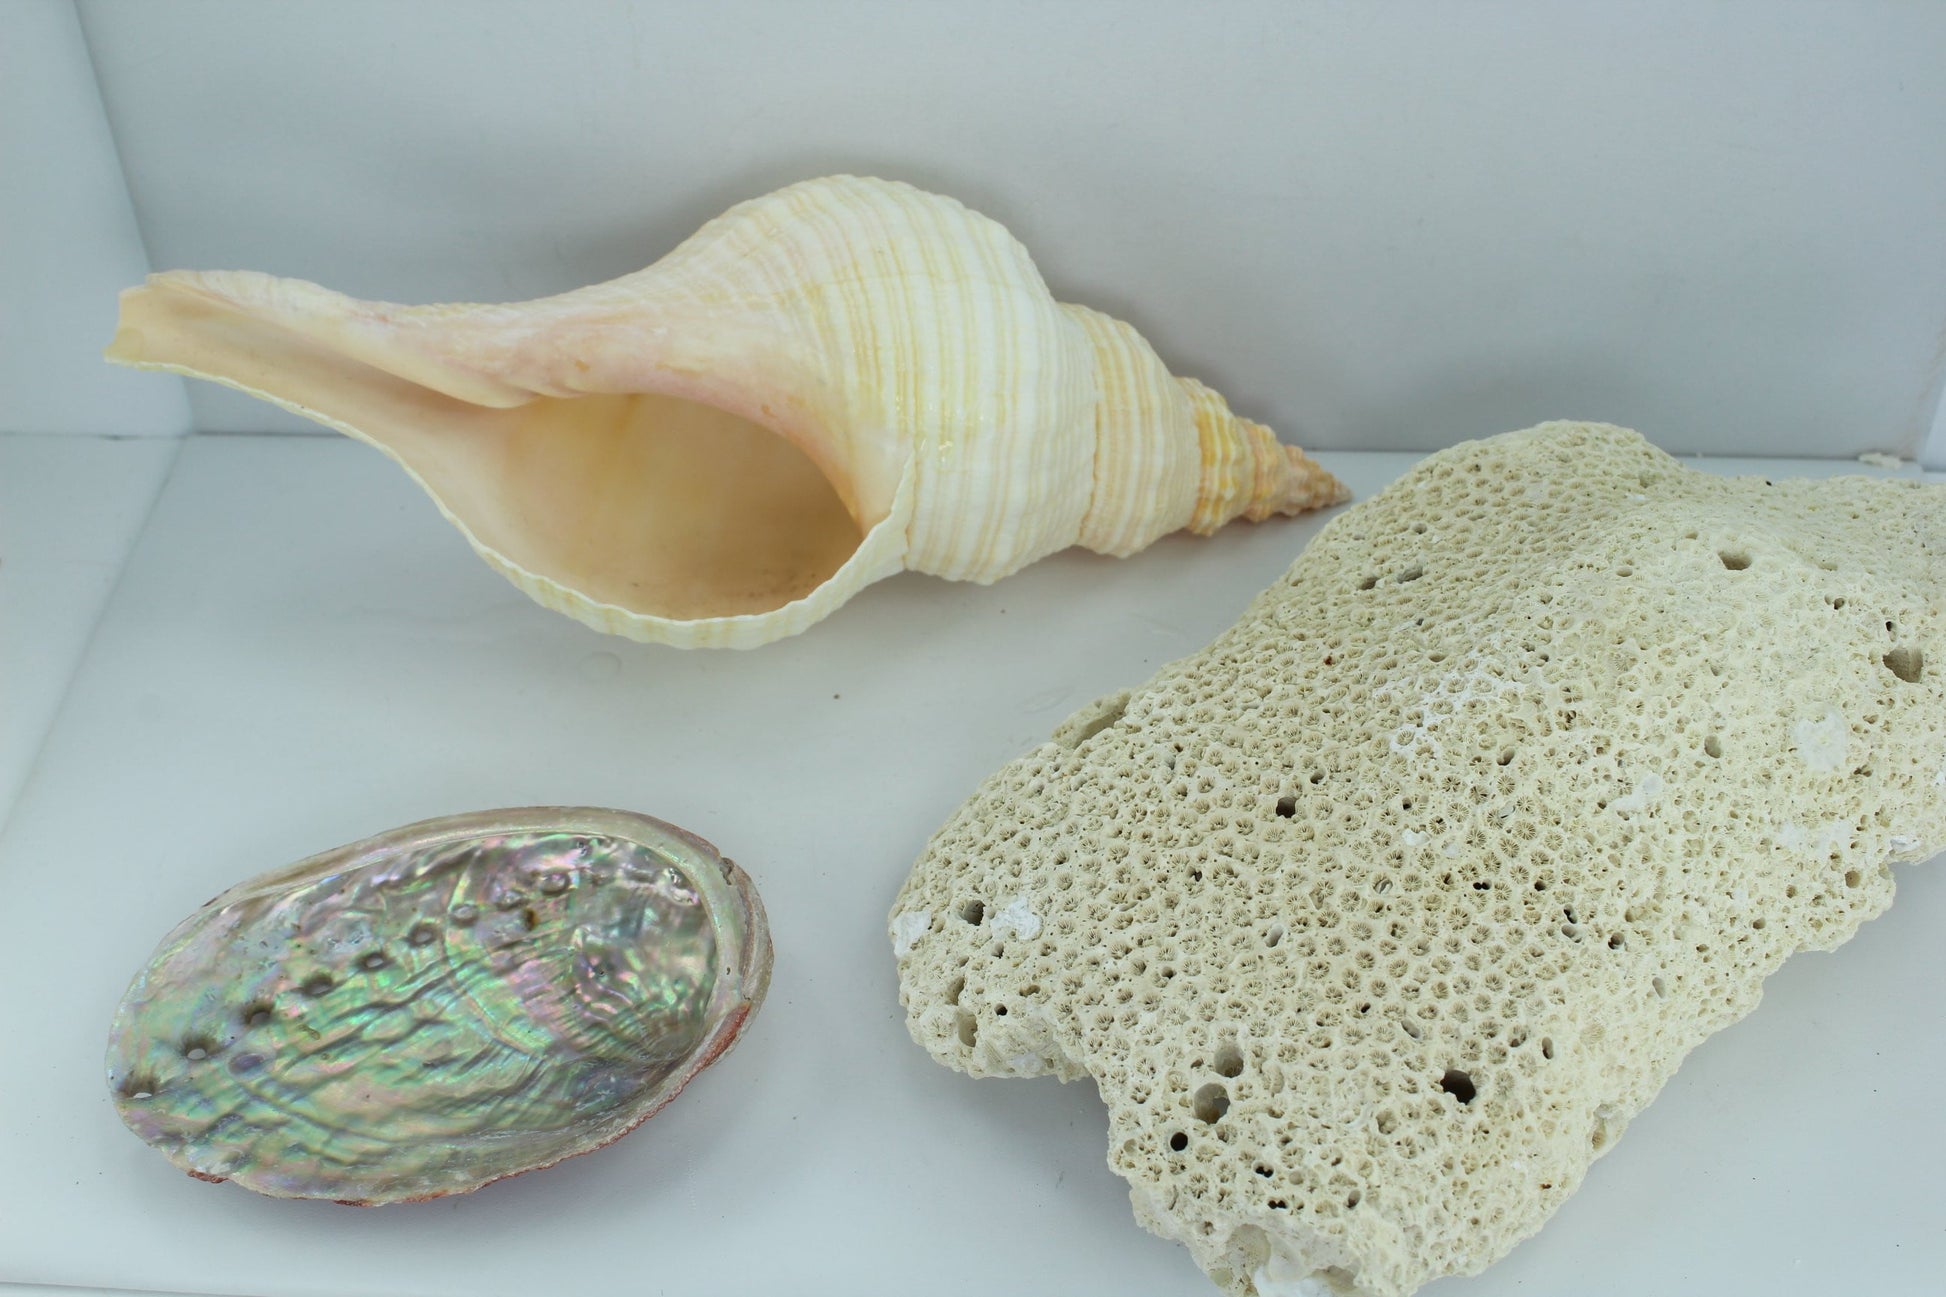 Florida Natural Shells Coral Horse Conch Red Abalone Vintage Estate Collection Shell Art aquarium